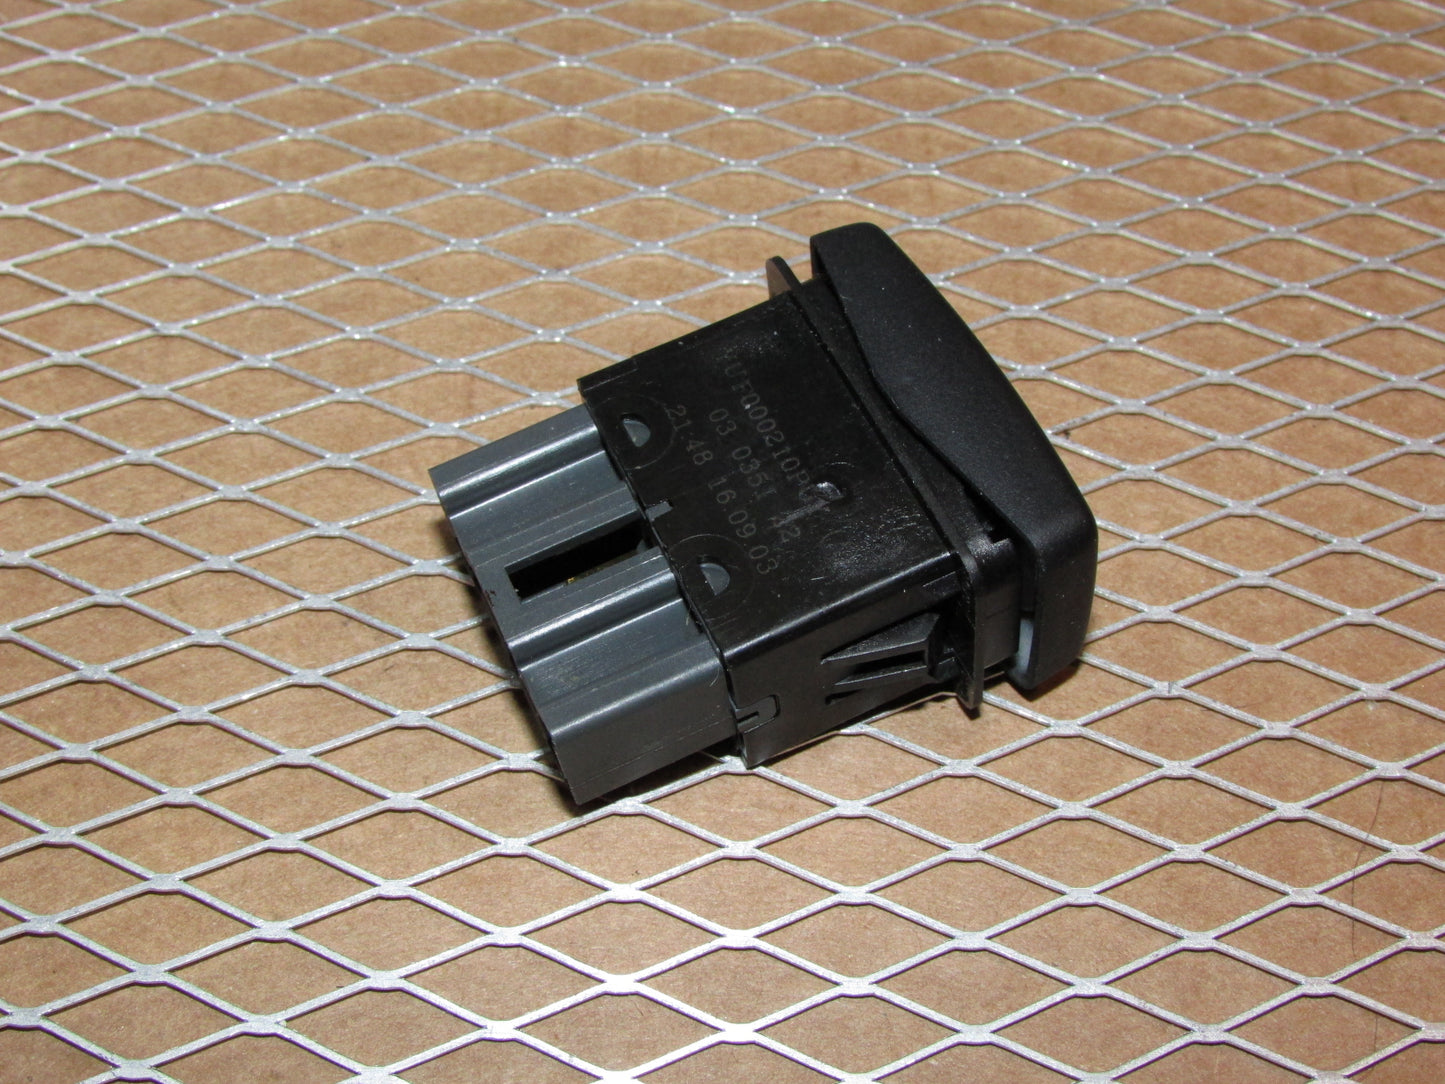 99-04 Land Rover Discovery 2 OEM Sunroof Moon Roof Switch